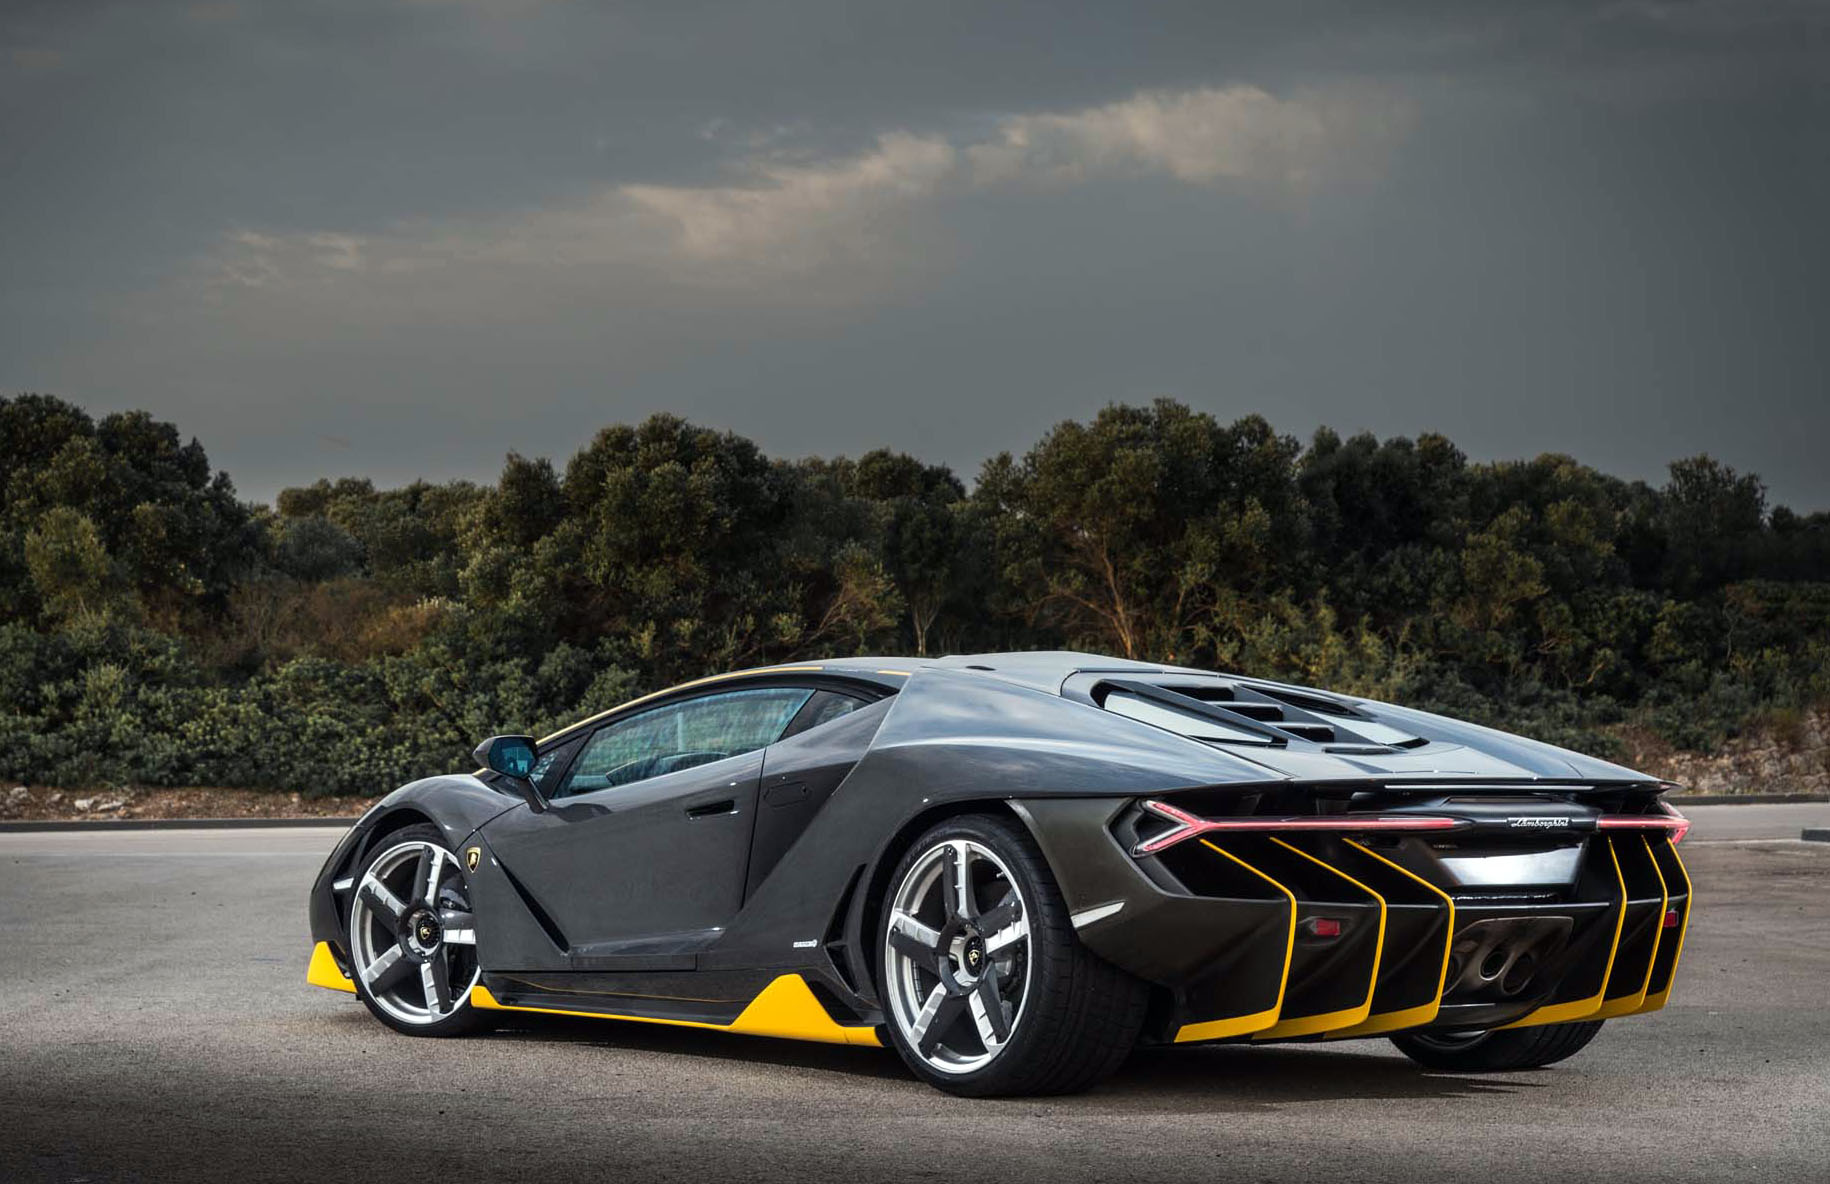 Centenario Wallpaper Chilly (+5) Images